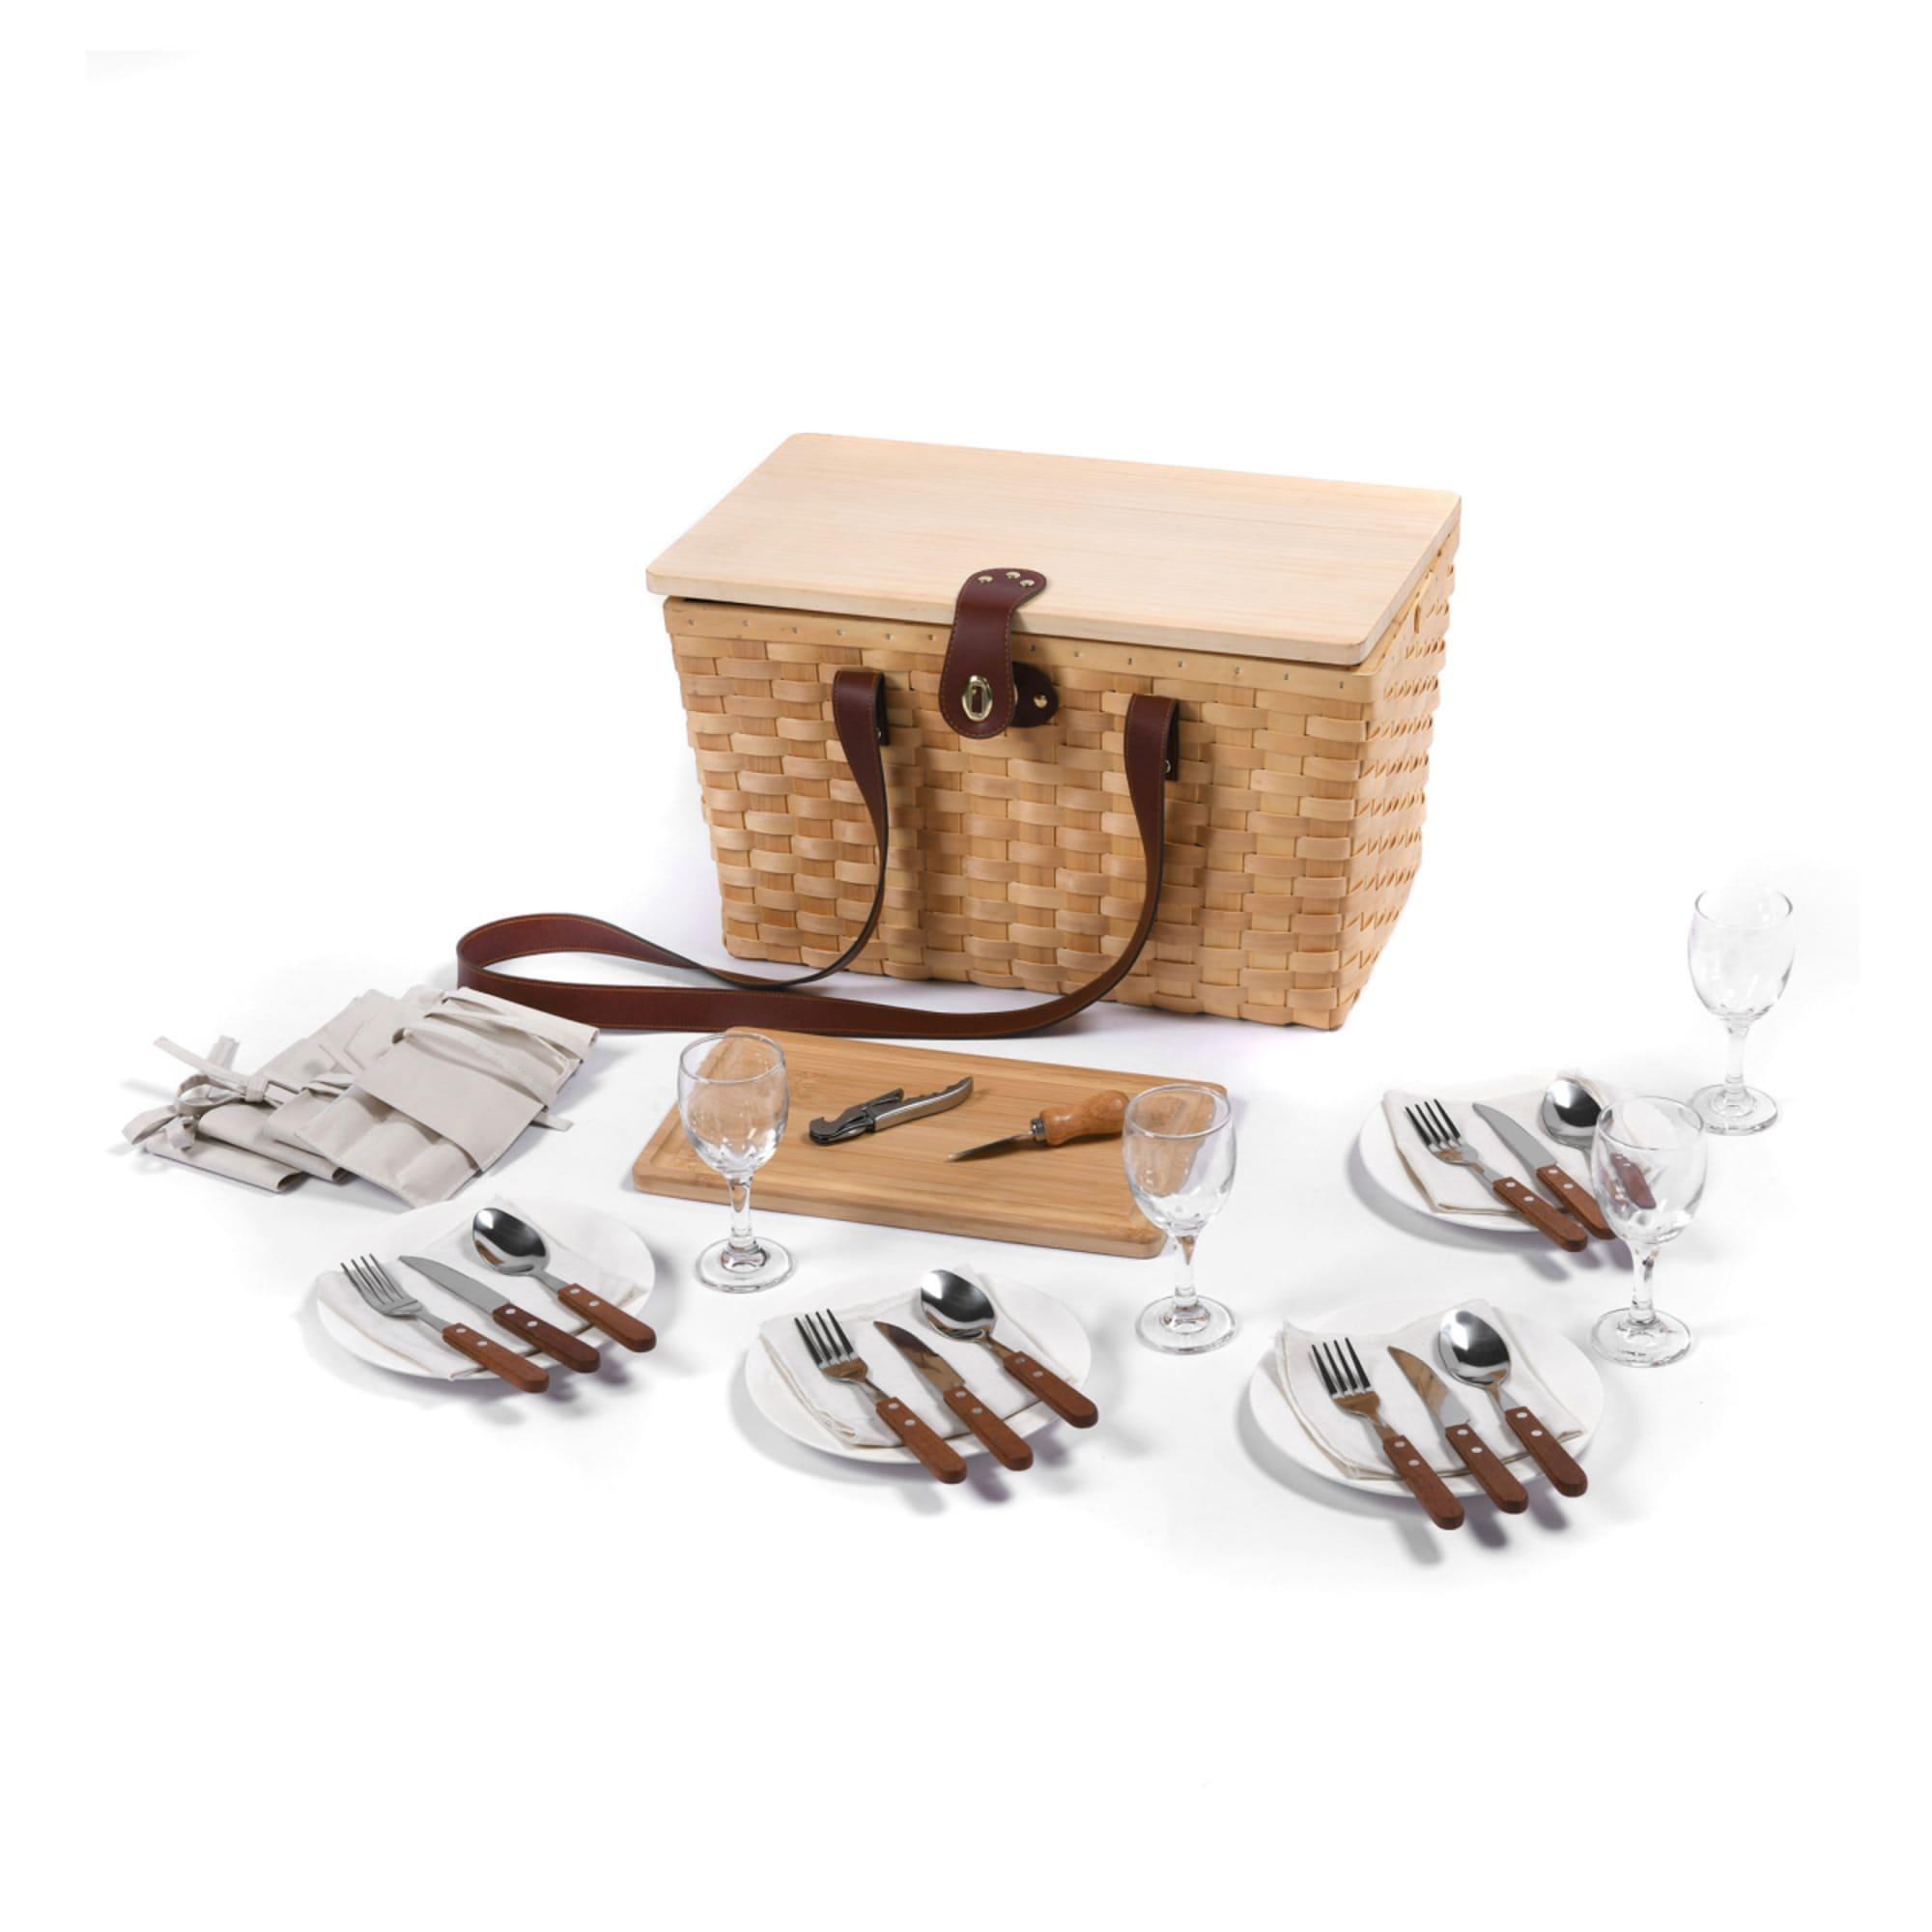 Vibes Barossa 4 Person Natural Wicker Picnic Basket Set Peach Image 3